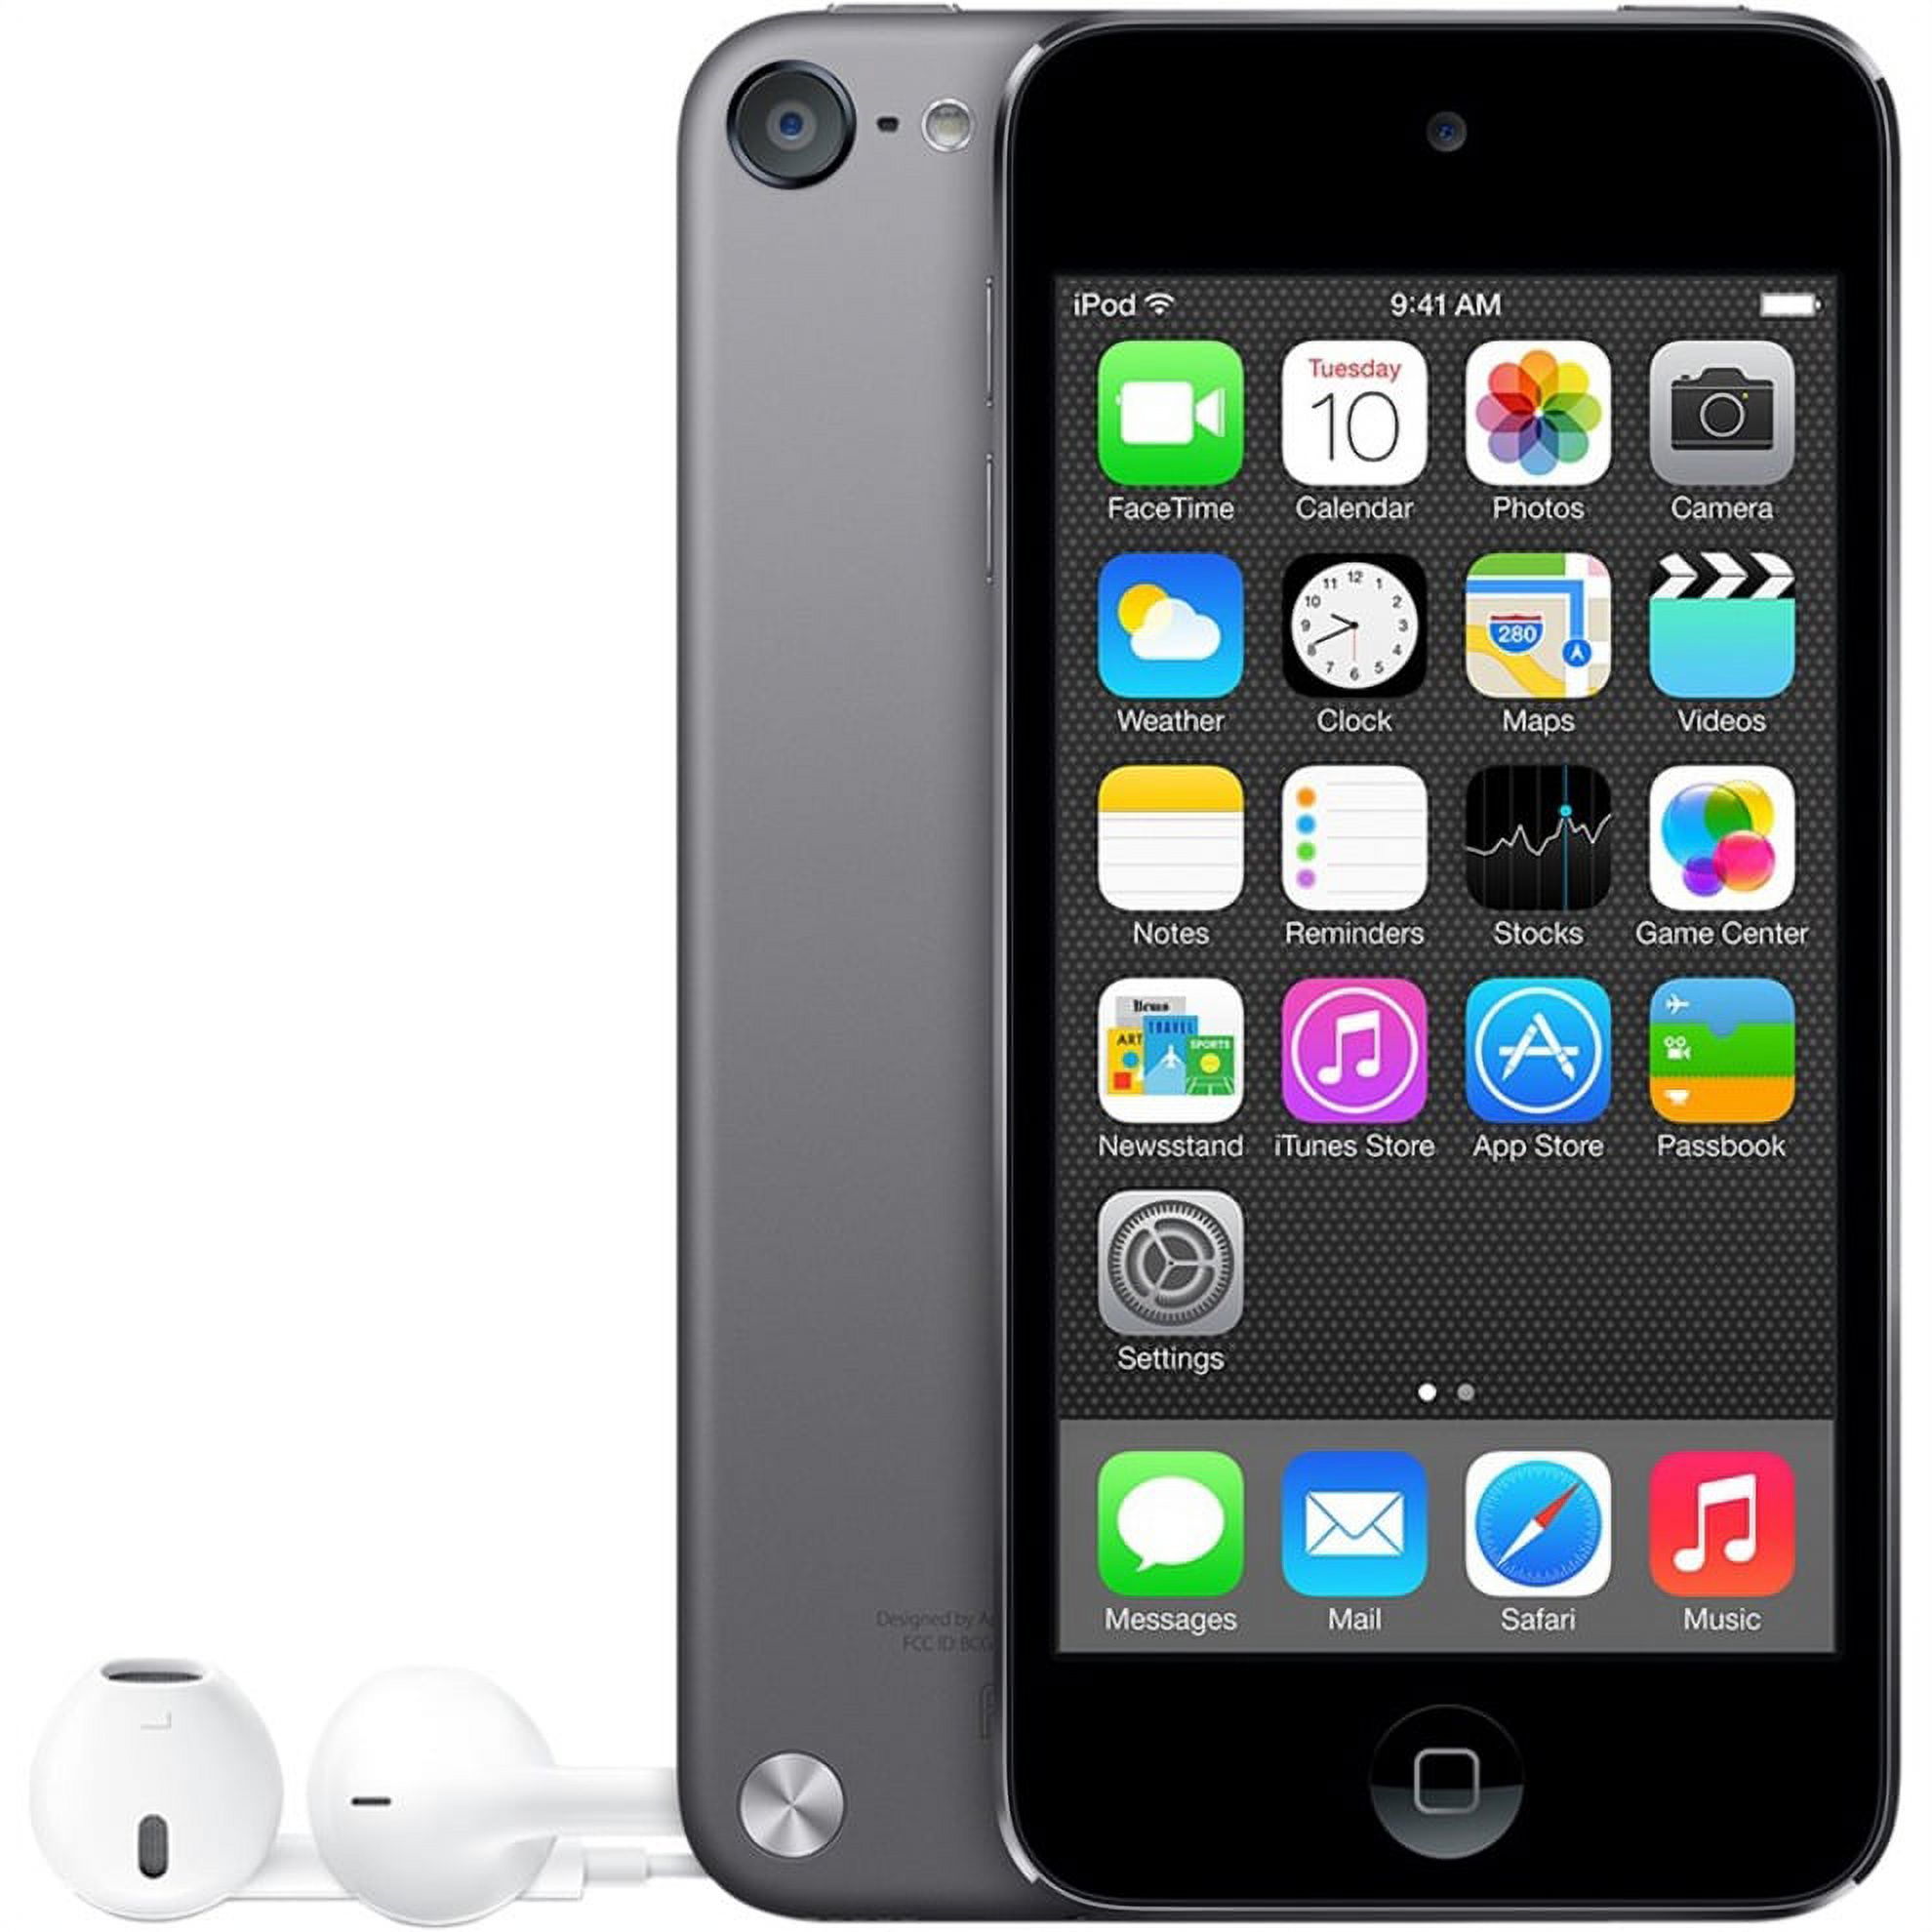 Apple iPod touch 5G 16GB MP3/Video Player with LCD Display & Touchscreen, Space Gray - image 1 of 4